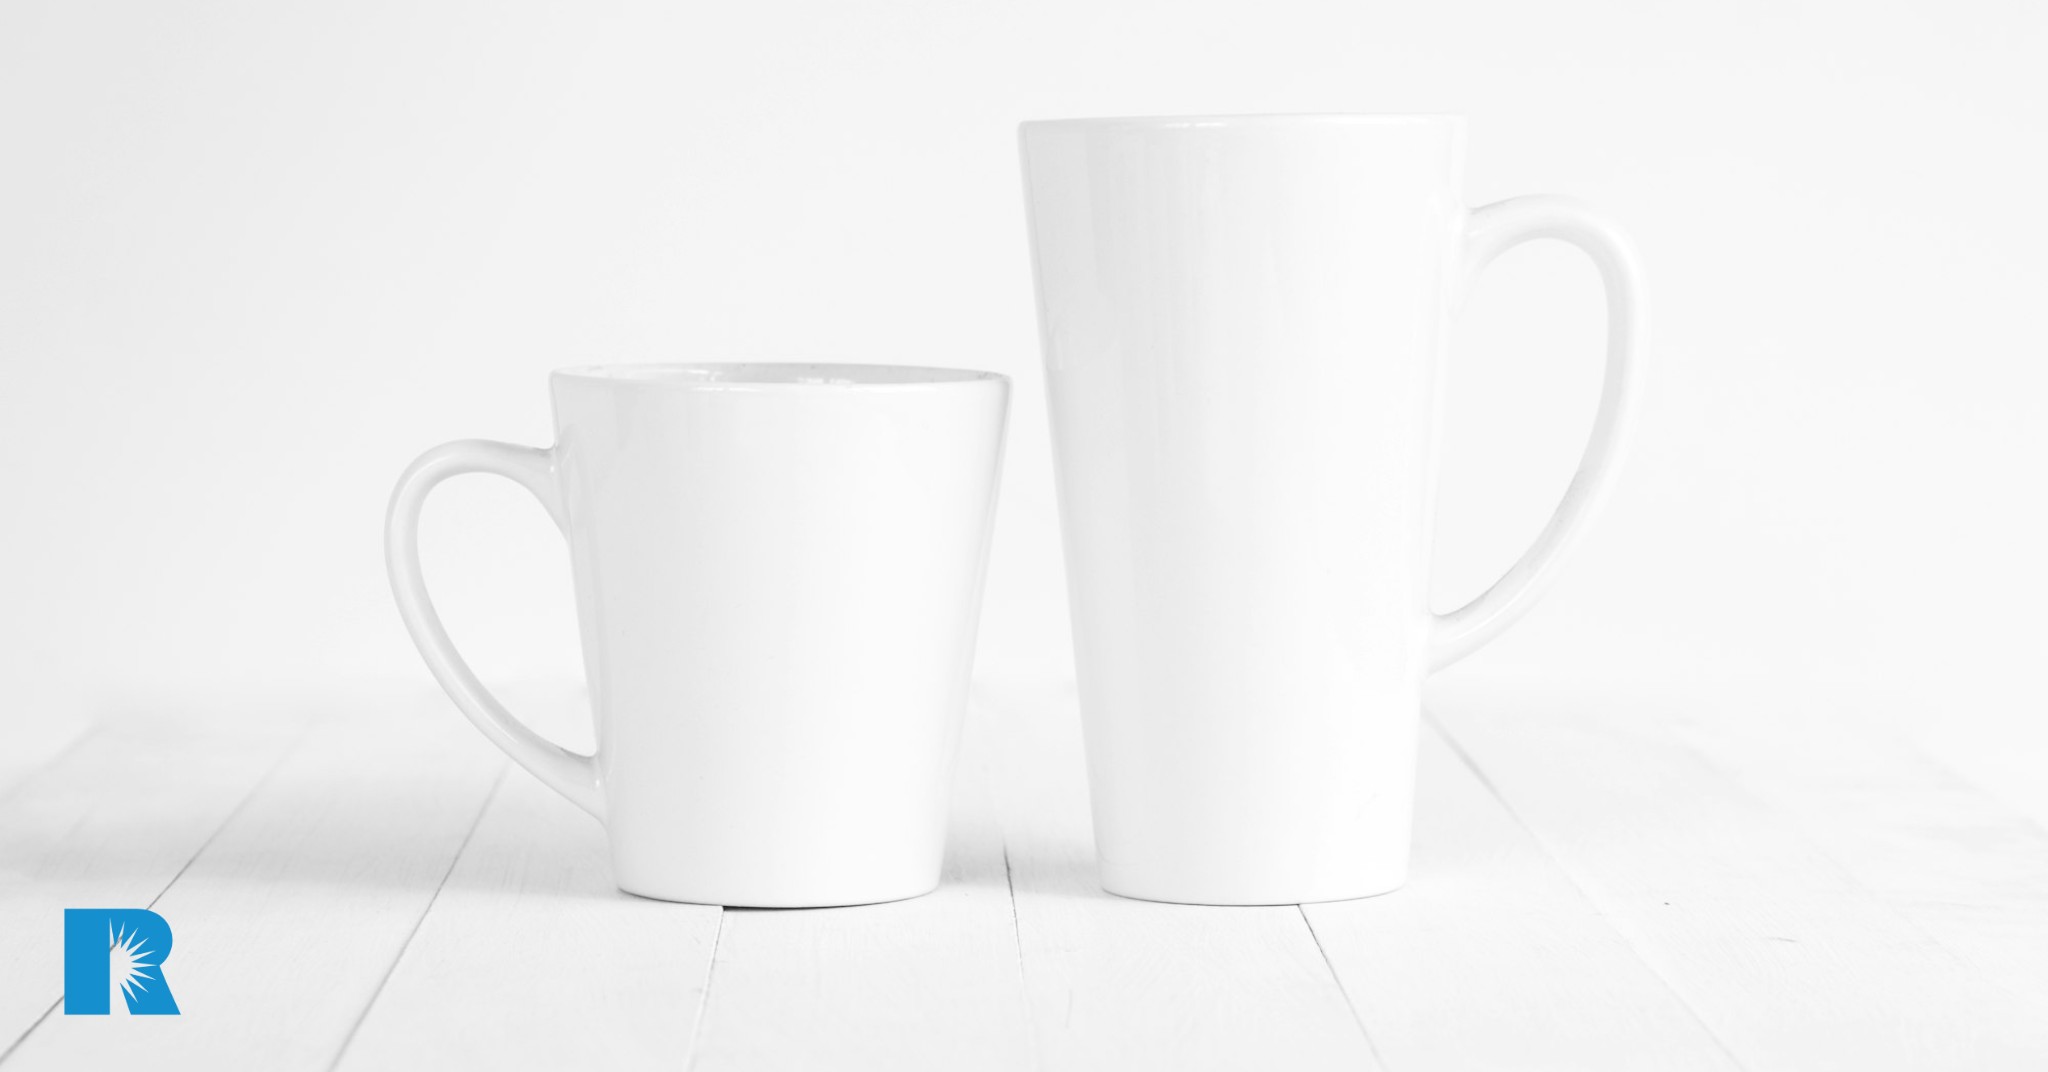 A photo illustration of two coffee cups, illustrating a comparison between the two.